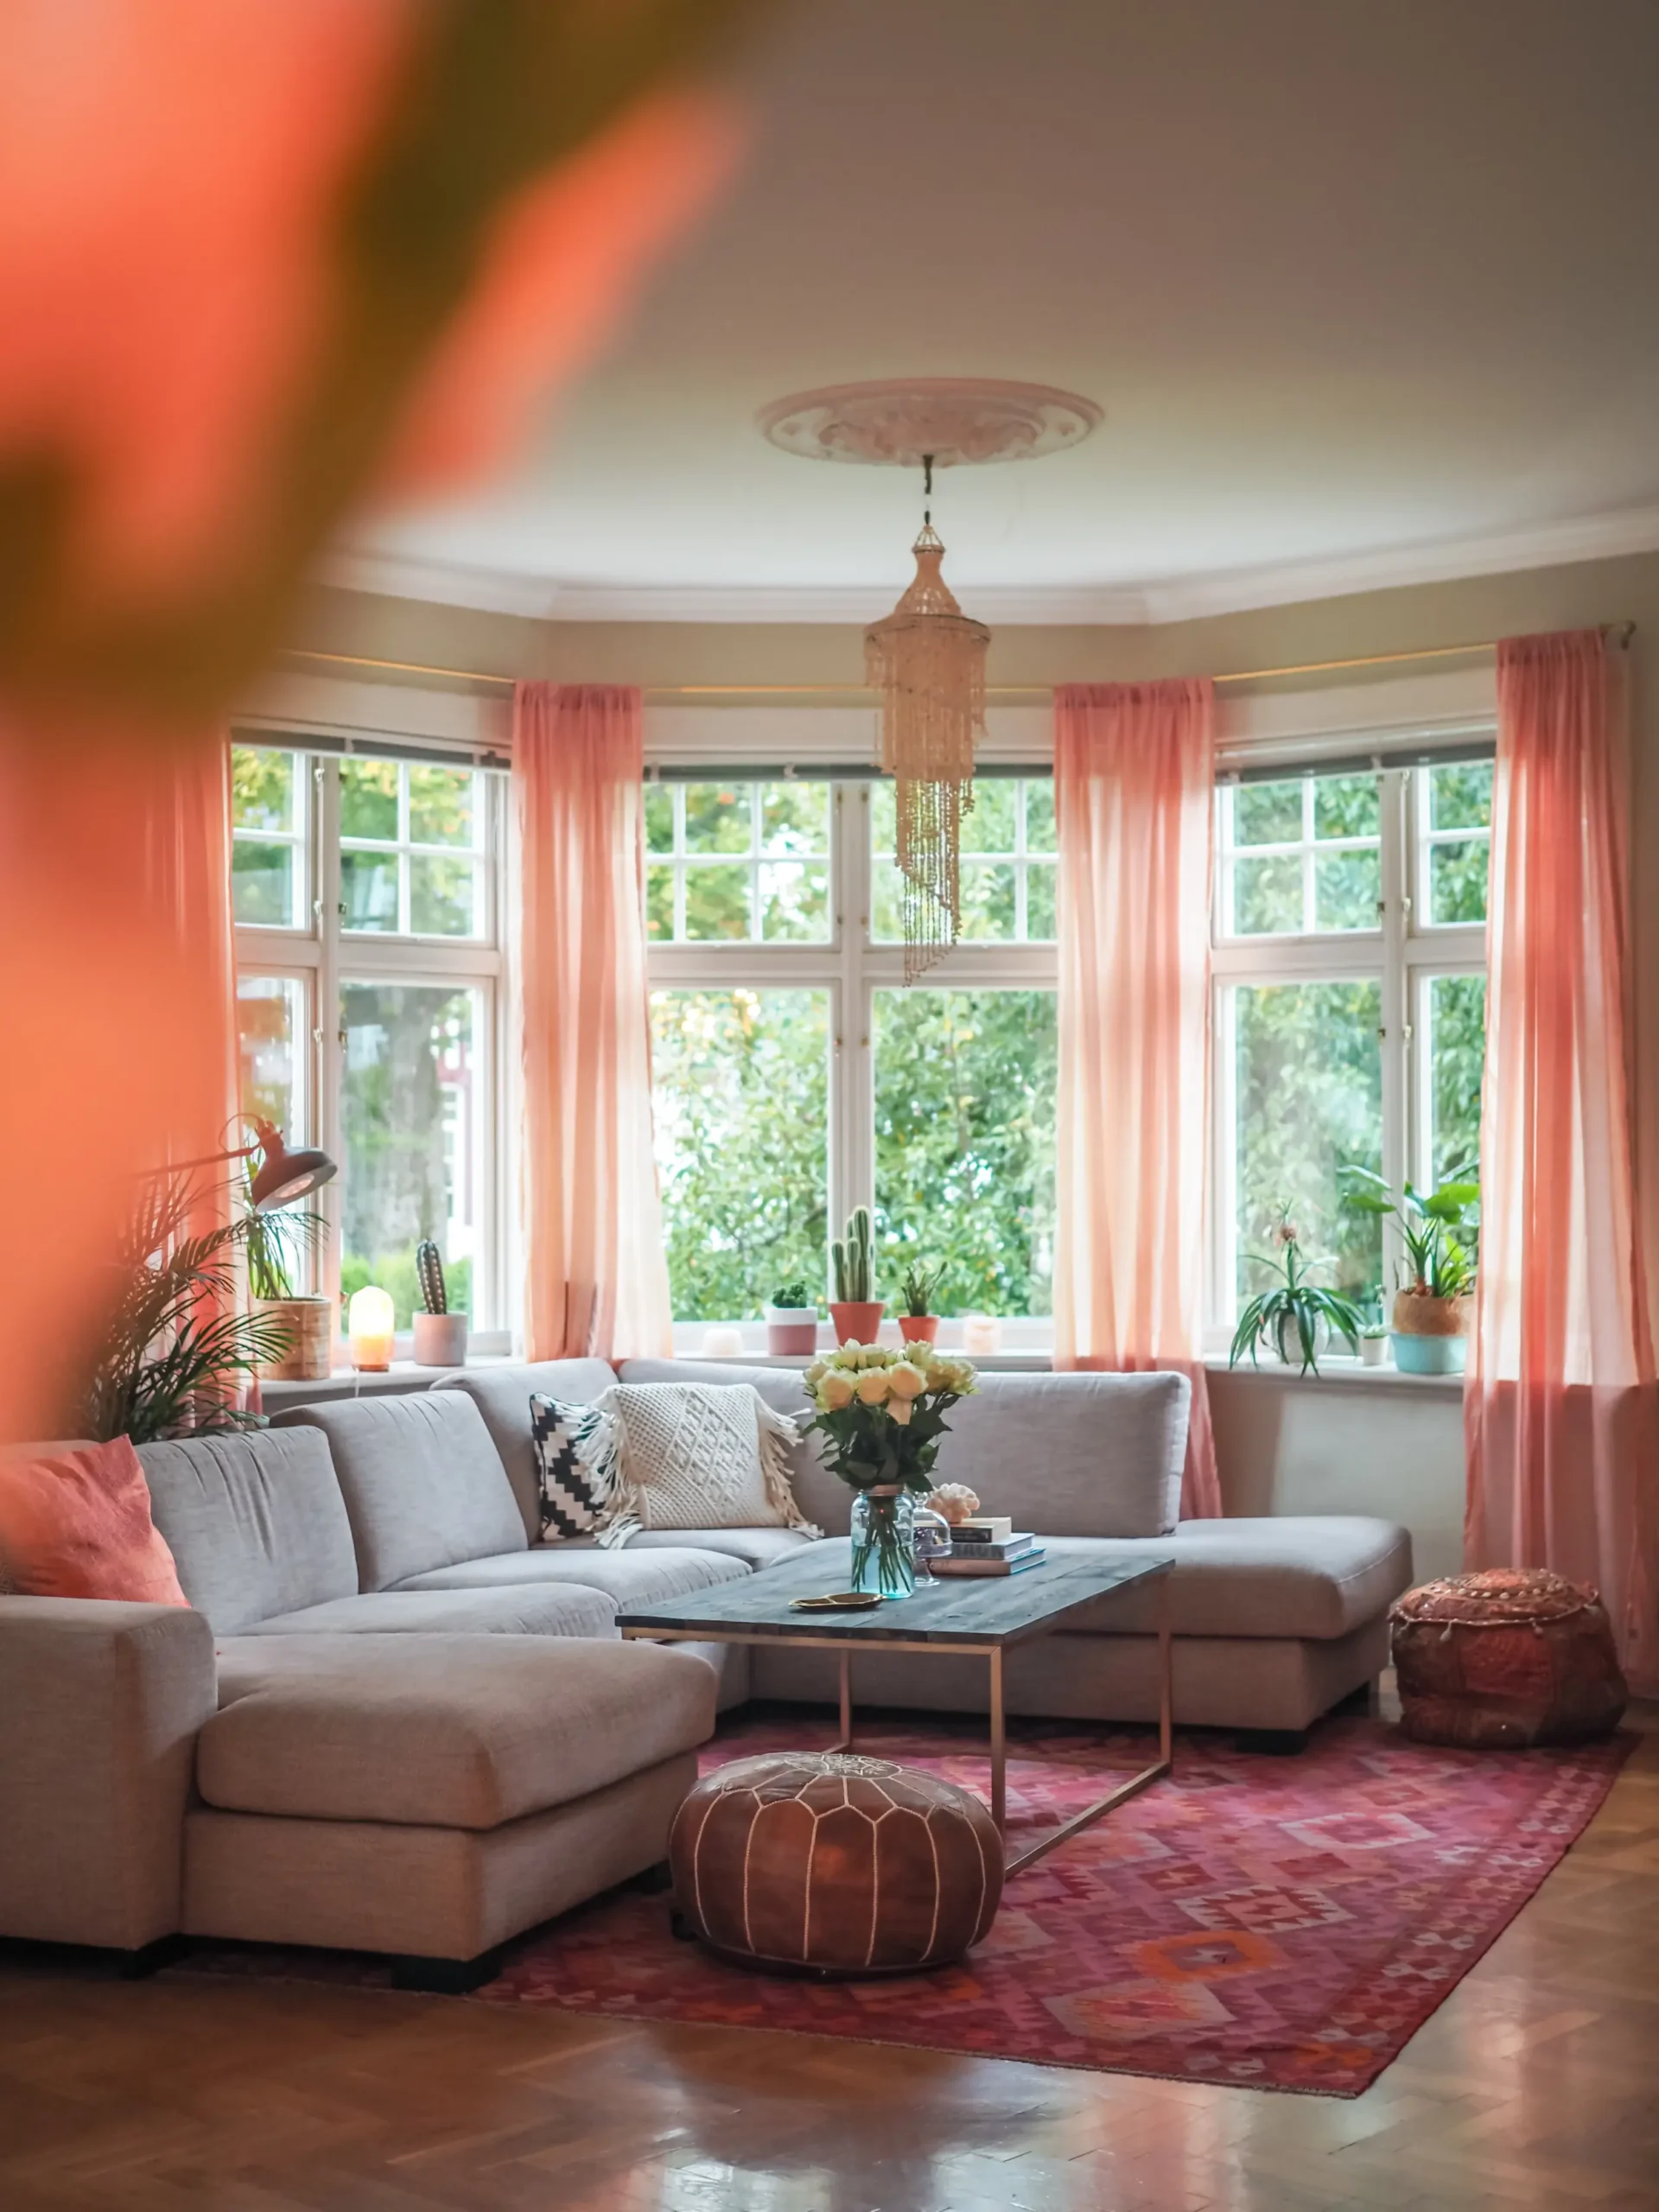 Manifest your dream house and interior, herringbone floor, large bay window with pink curtains, Moroccan pouf, pink Kilim rug, ceiling rosette and seashell chandelier.